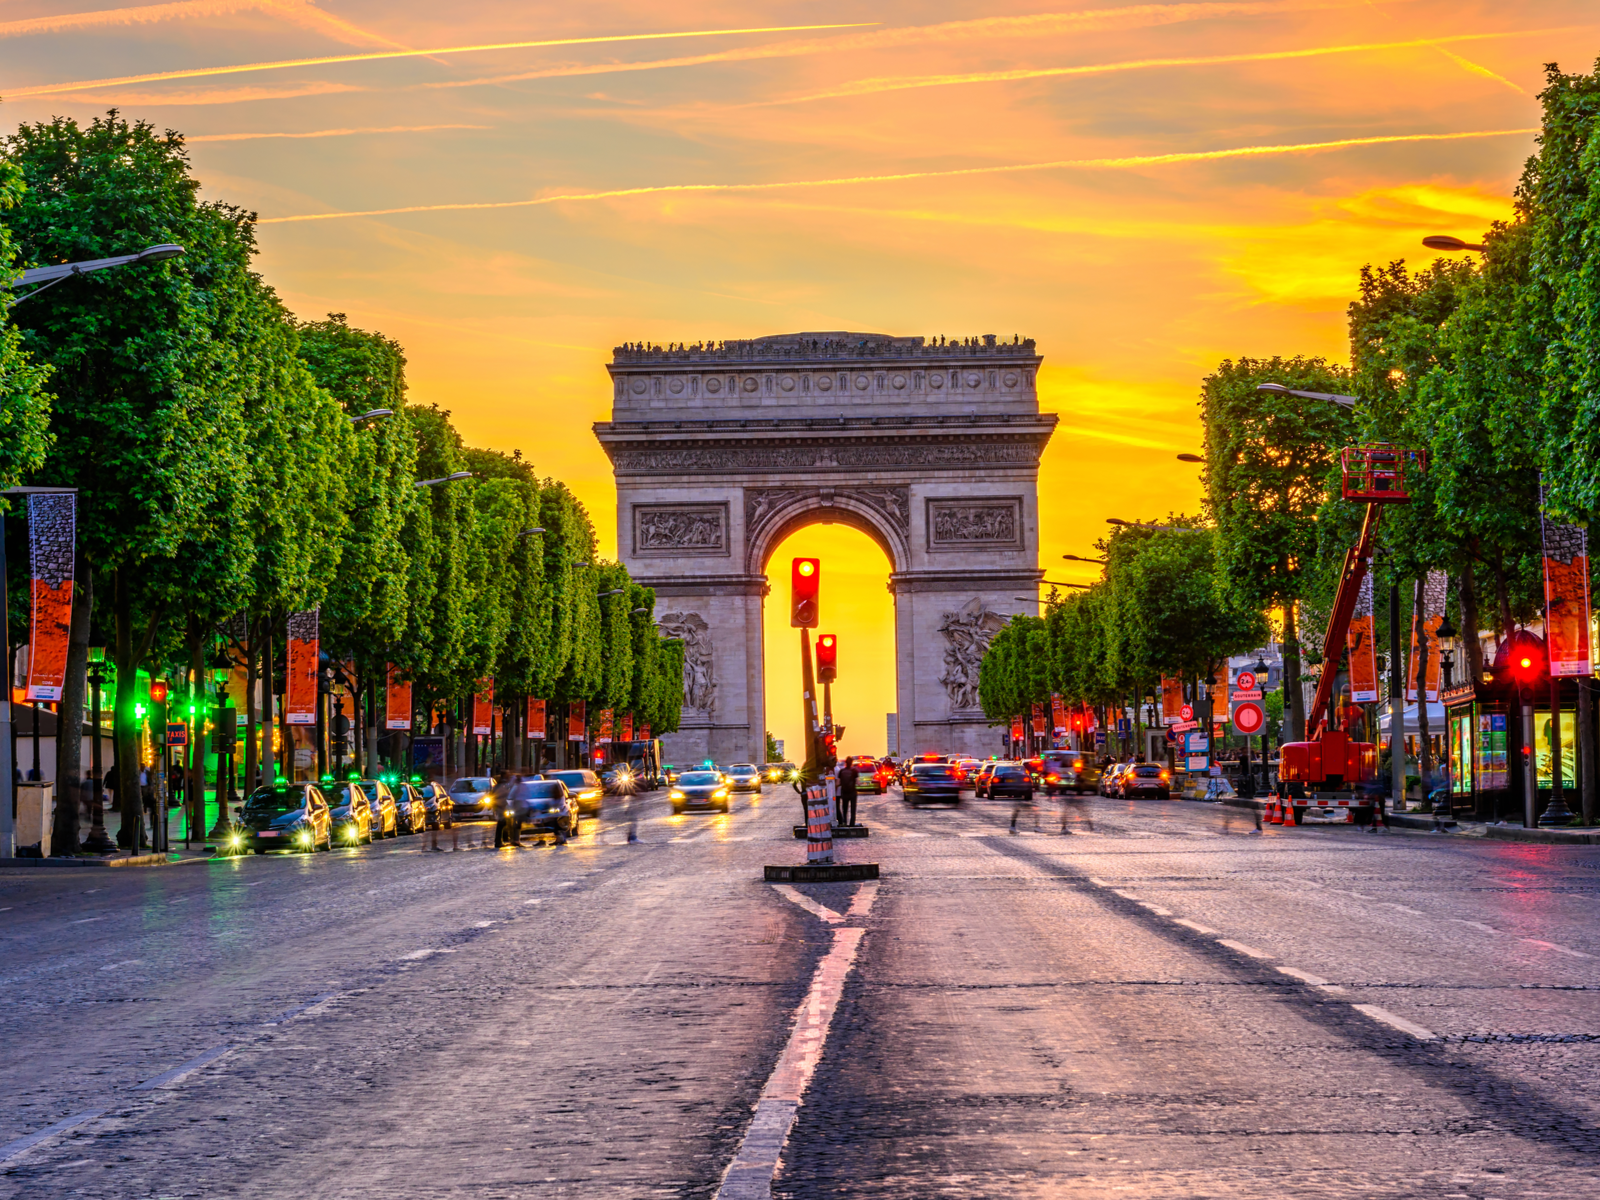 Champs-Elysees and Arc de Triomphe at night during the Summer, the best time to visit France